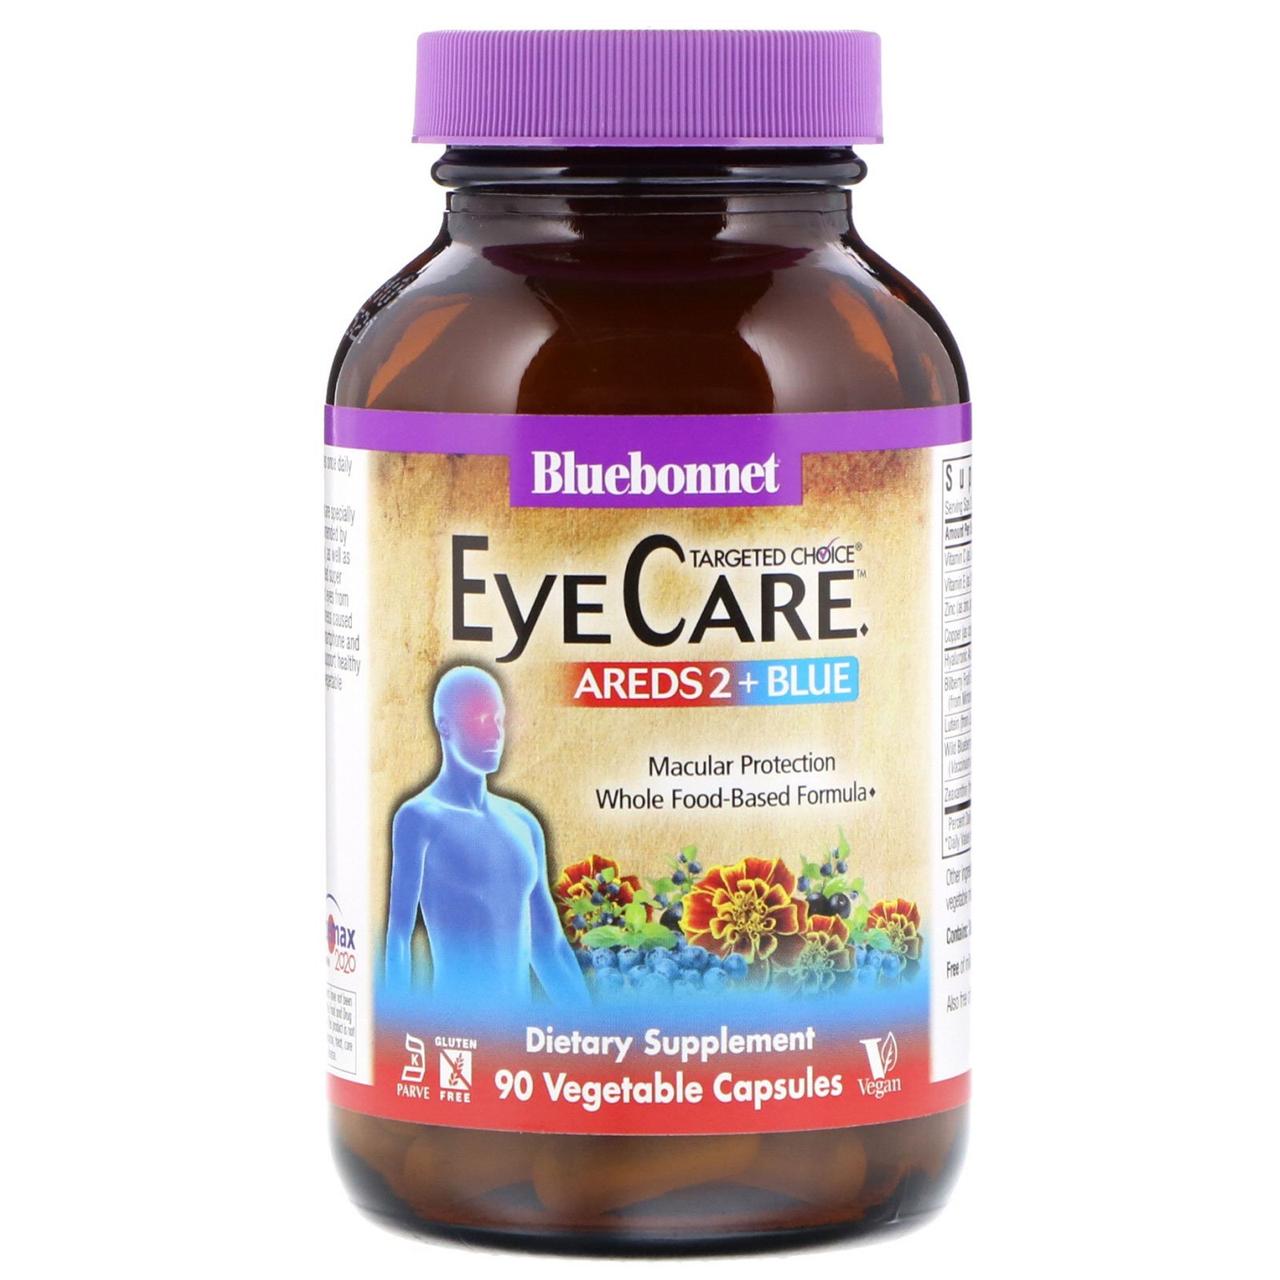 Bluebonnet Nutrition, Targeted Choice, Eye Care, 90 Vegetable Capsules